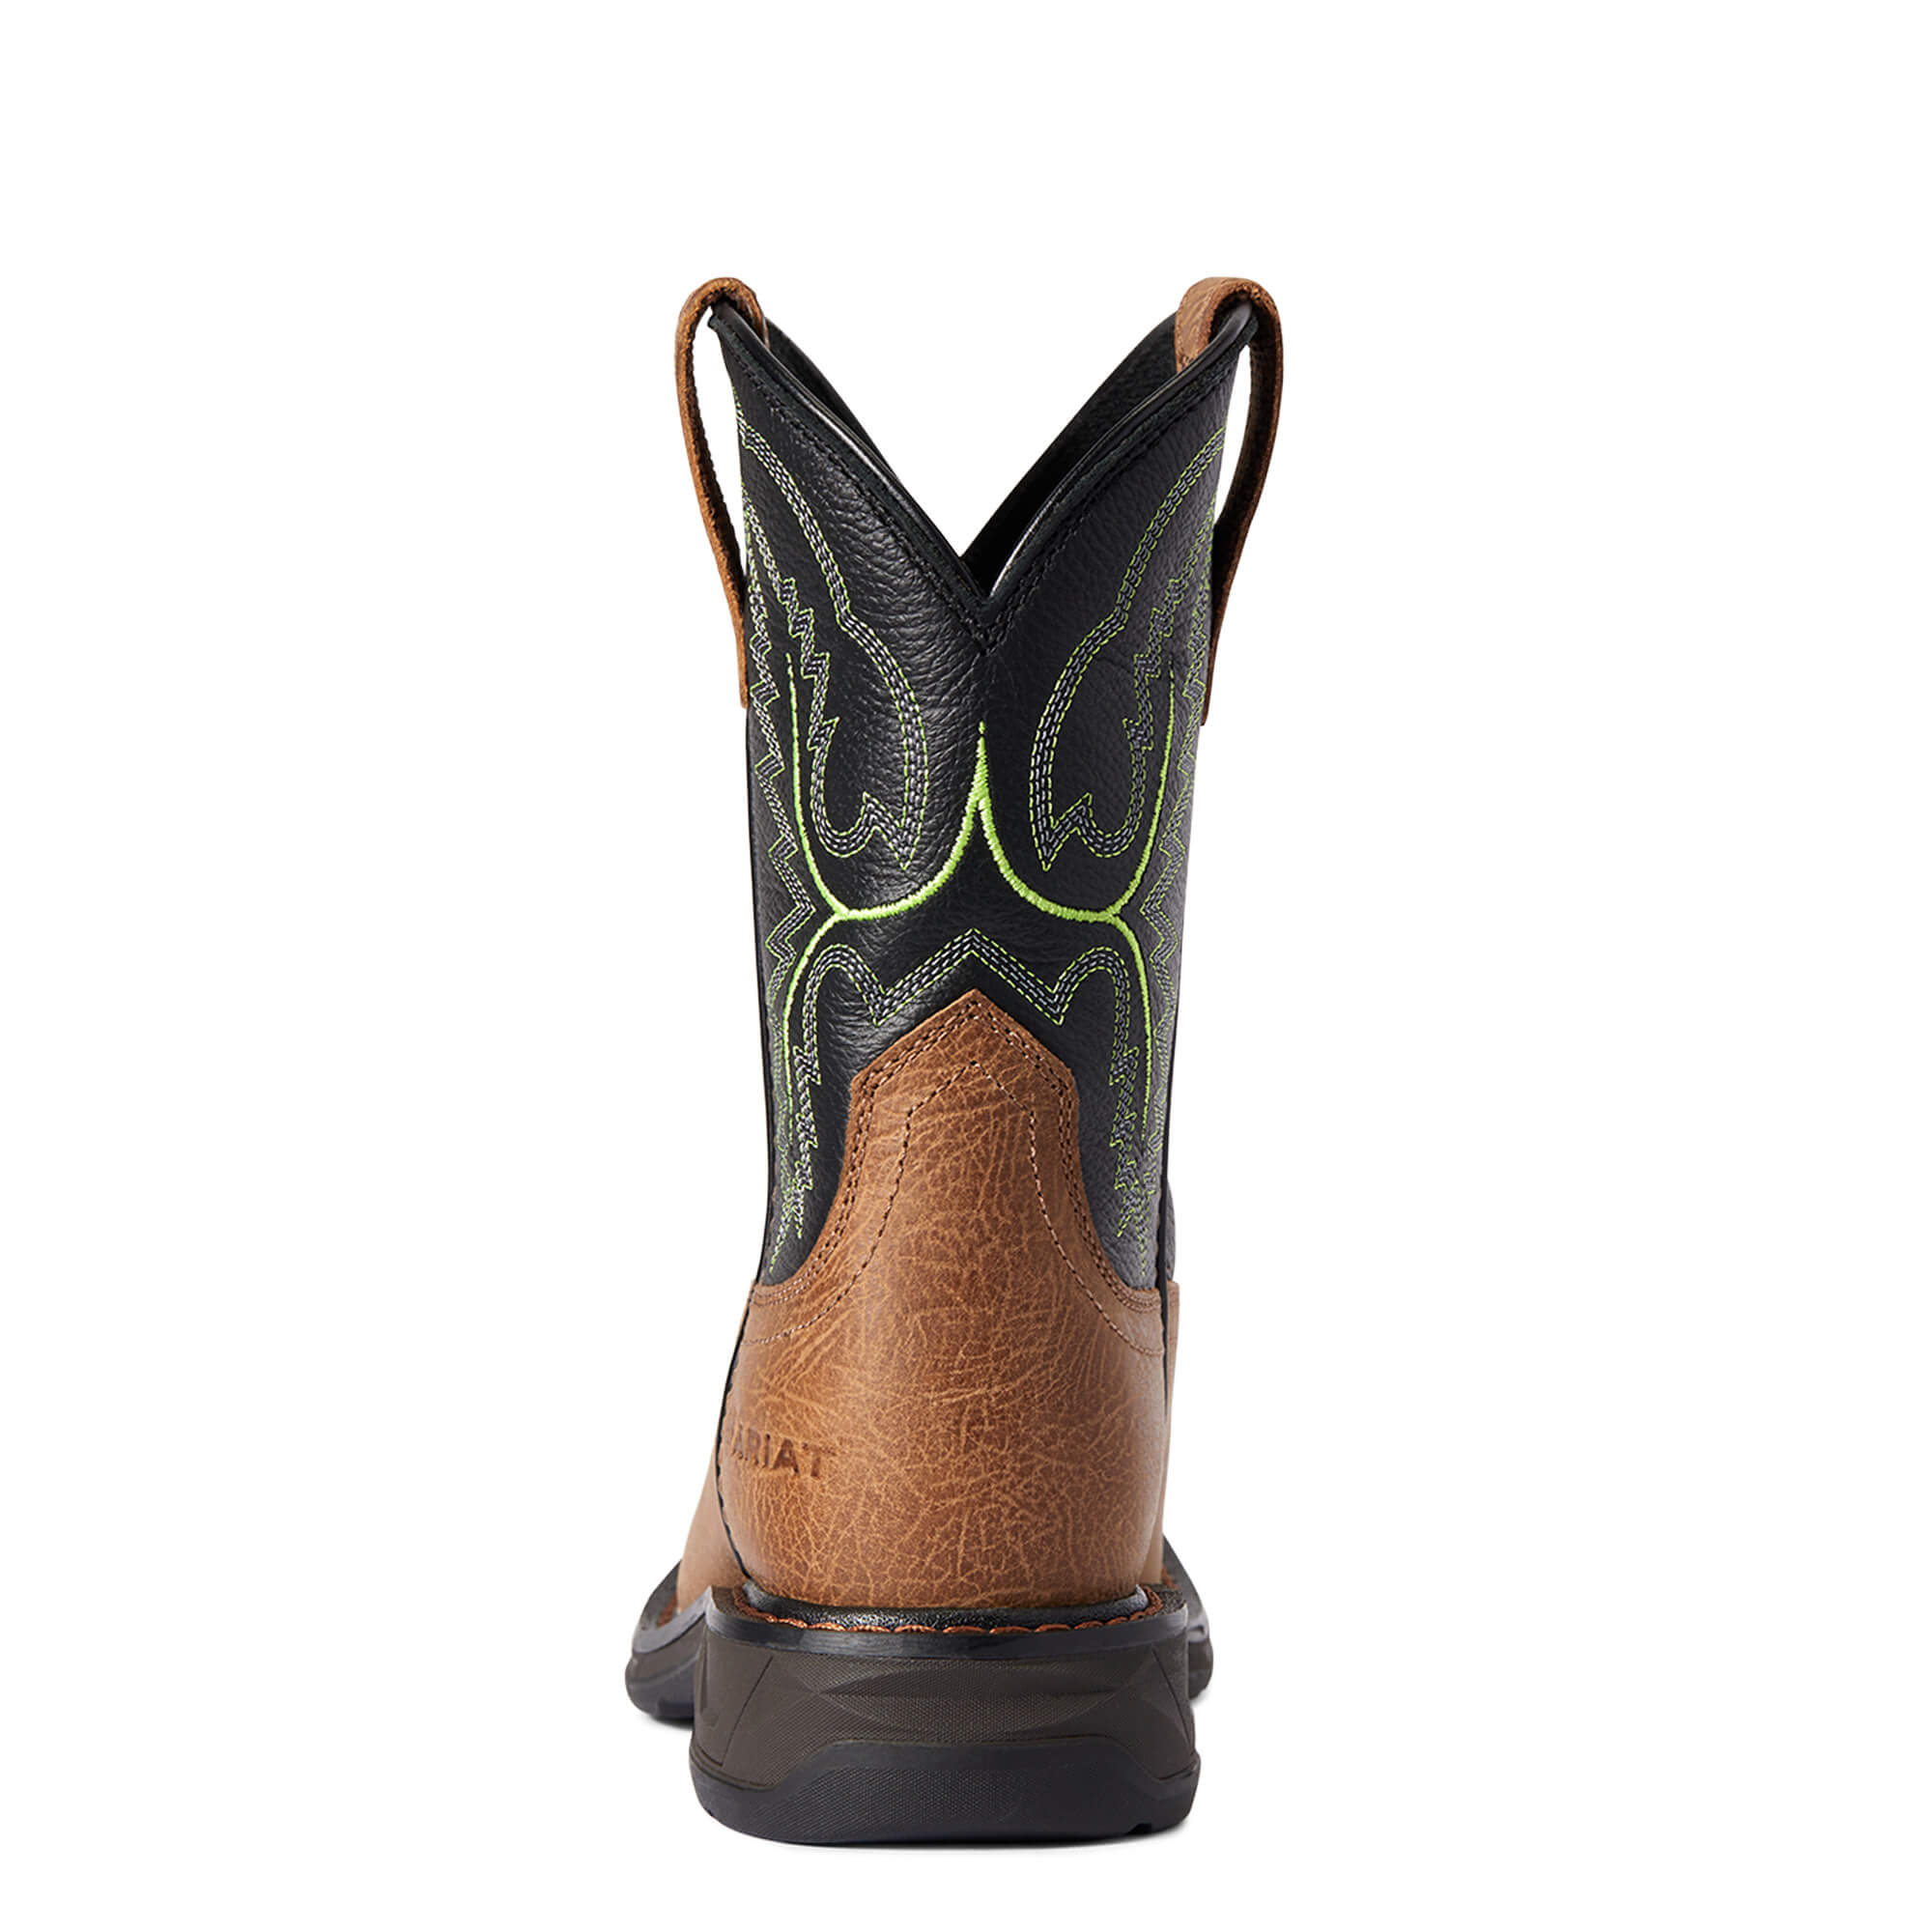 Ariat Kids WorkHog XT Wide Square Toe Boot